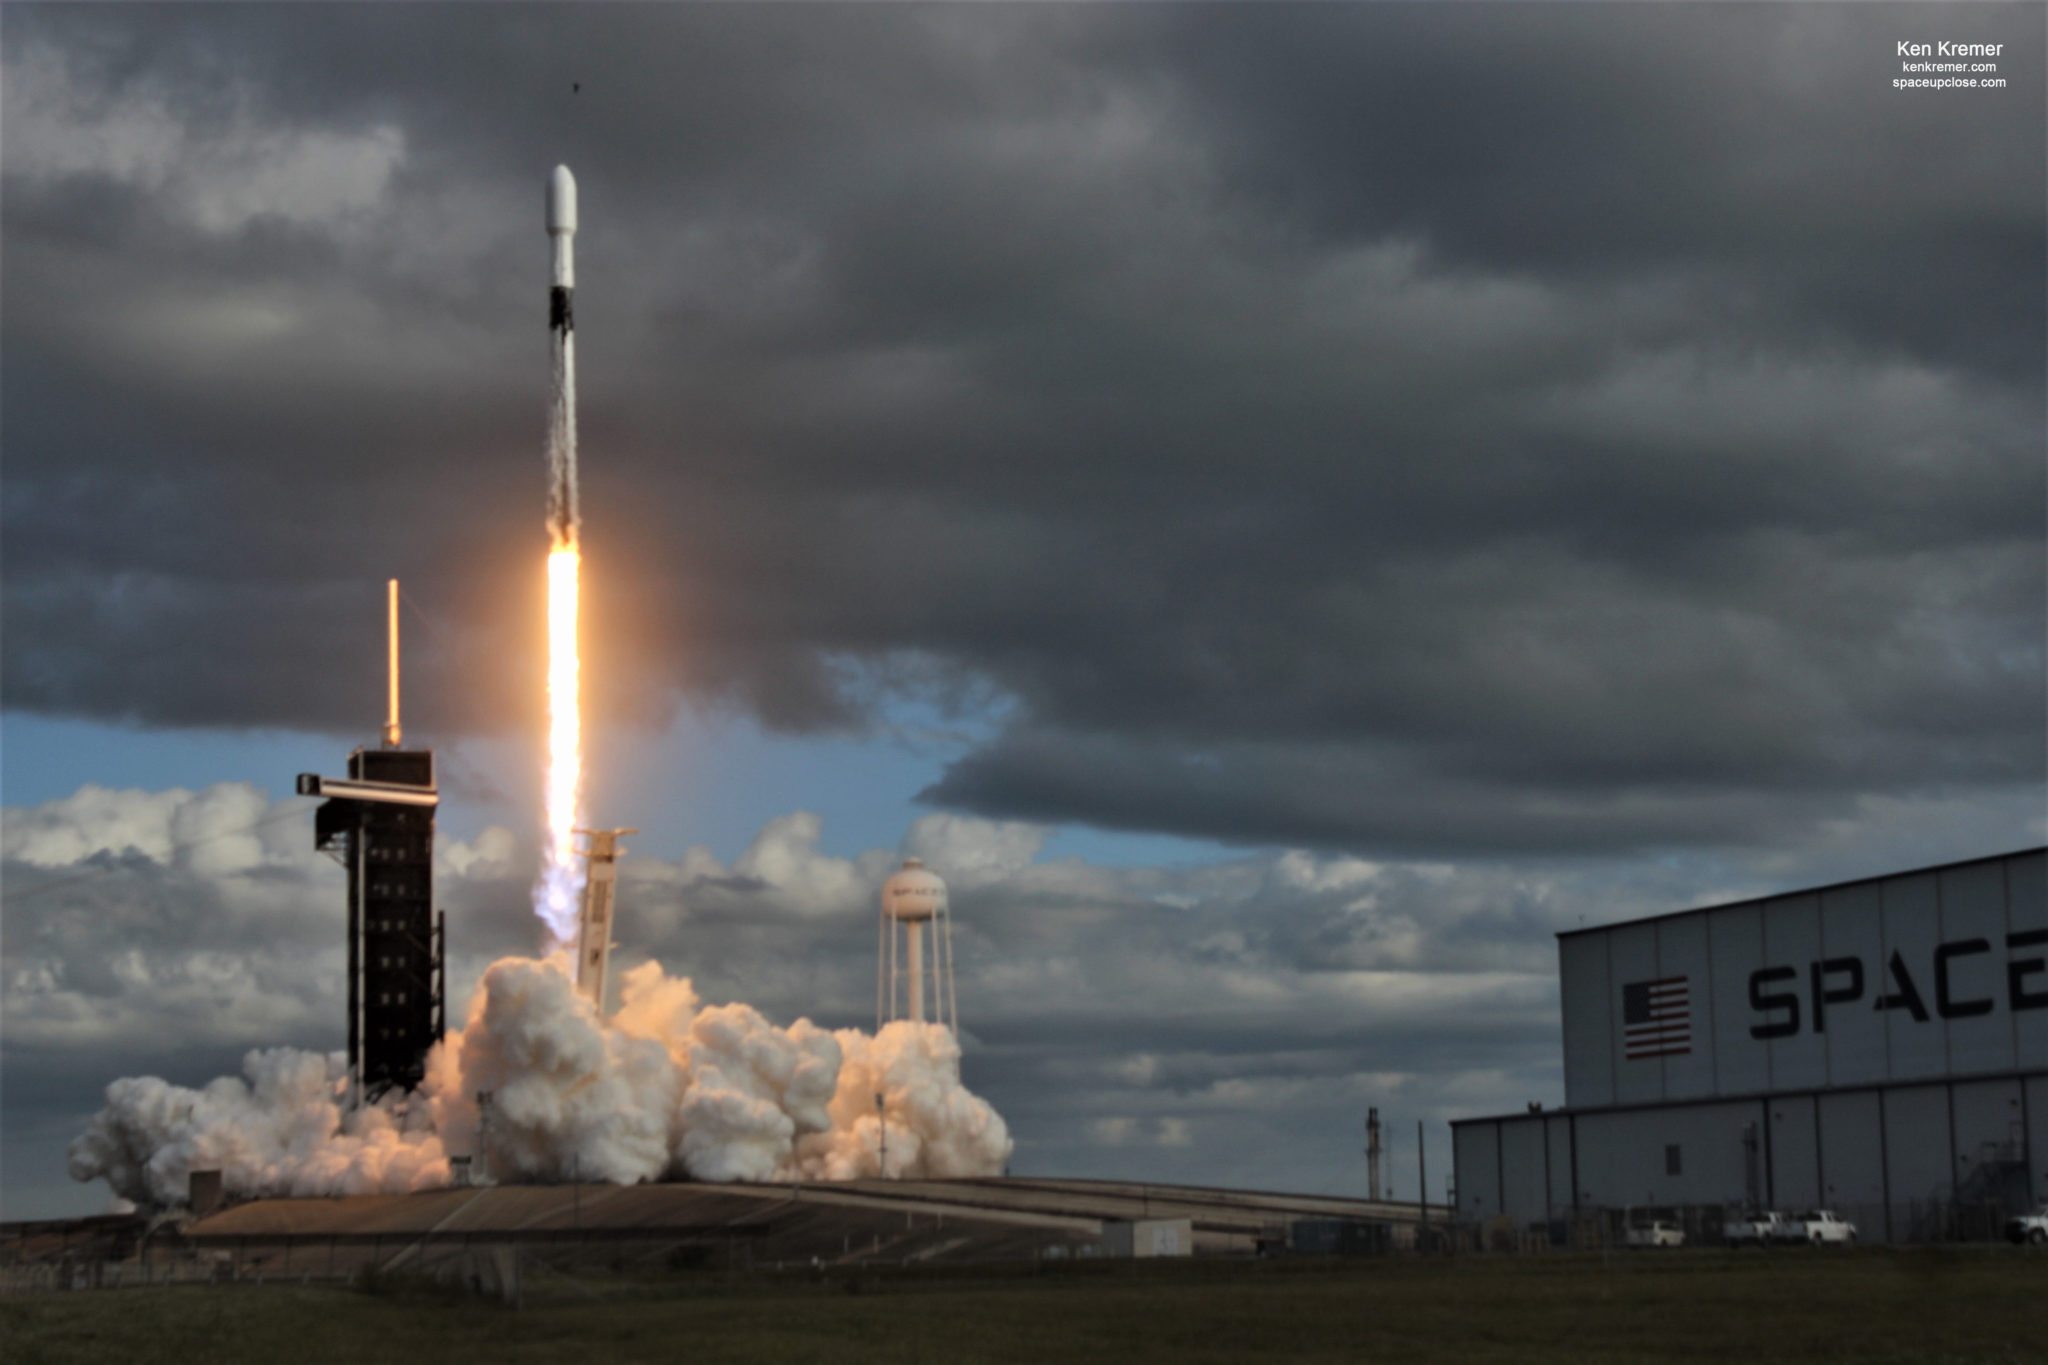  A SpaceX Falcon 9 rocket launches the NRO spy satellite network into orbit.